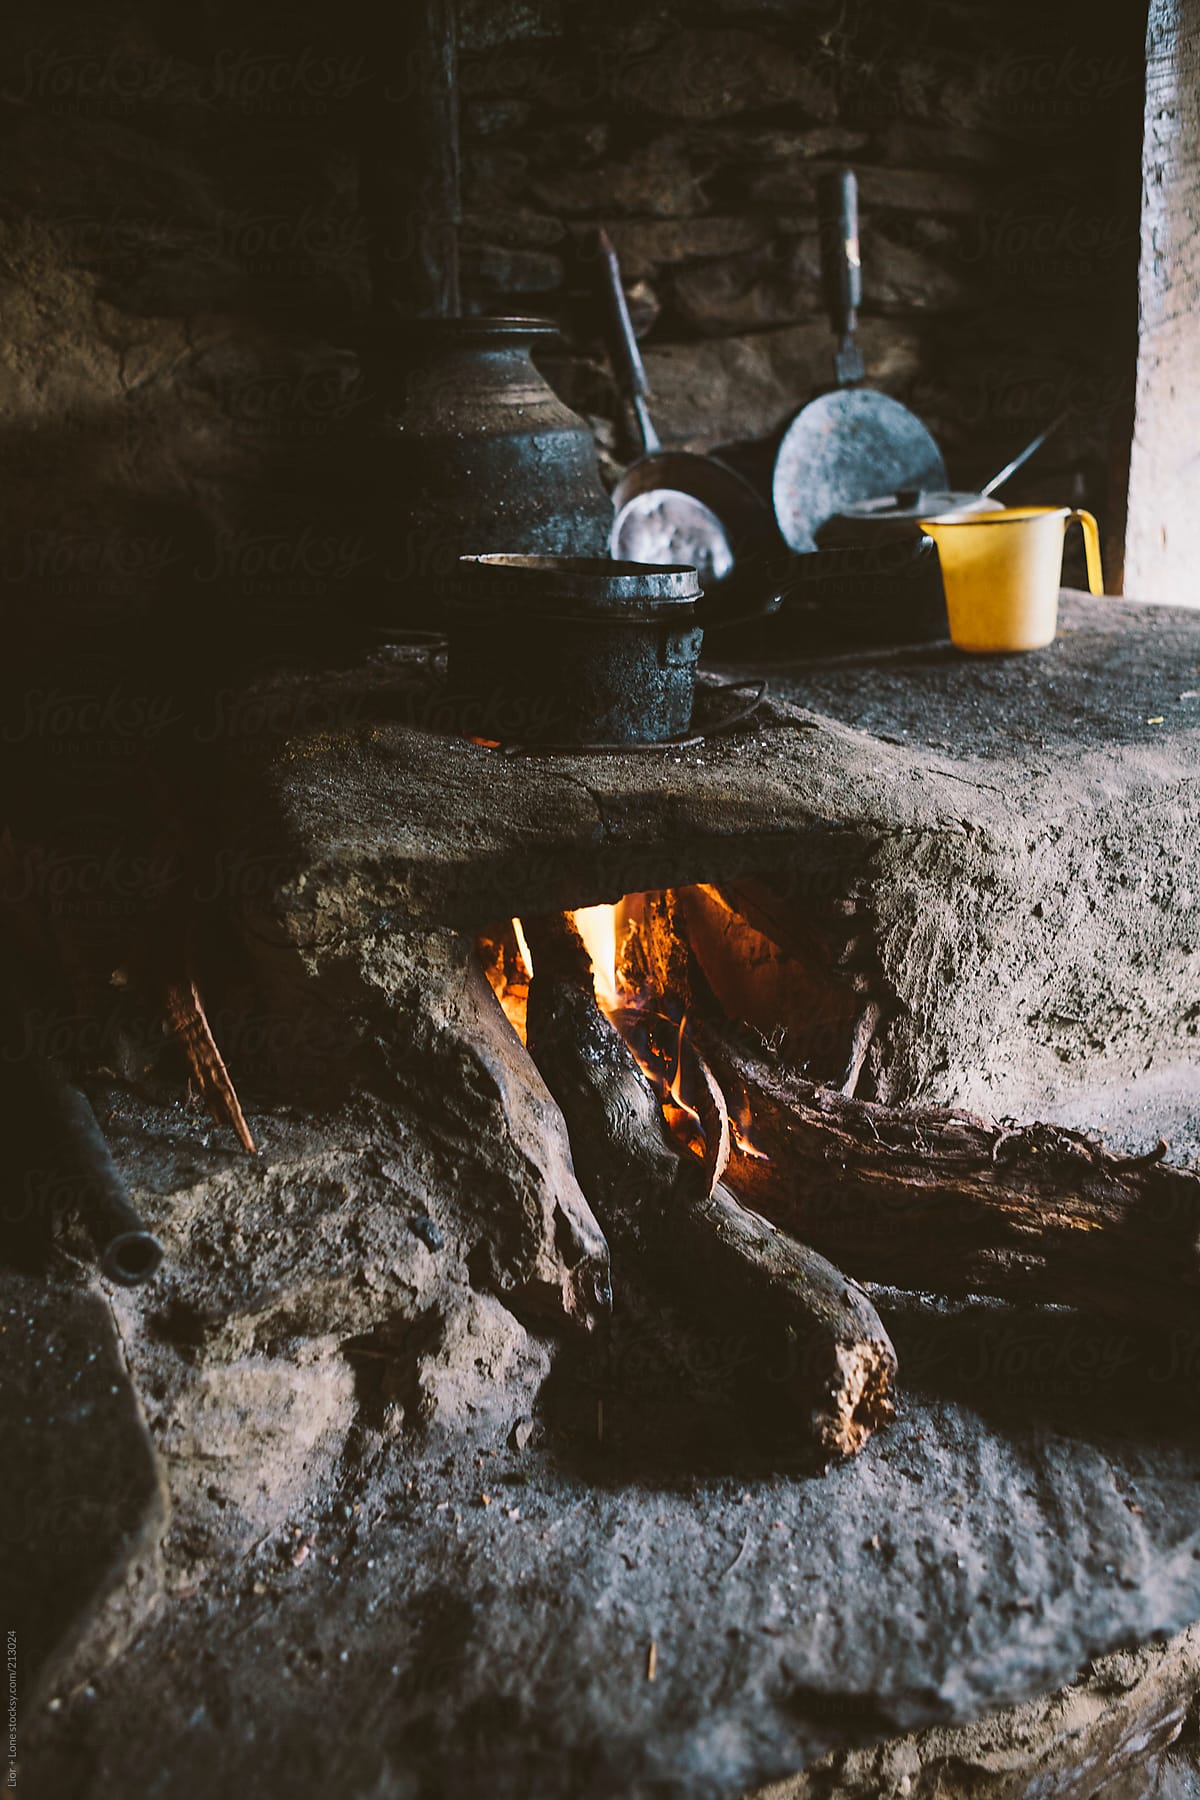 Cooking on wood oven in rural India